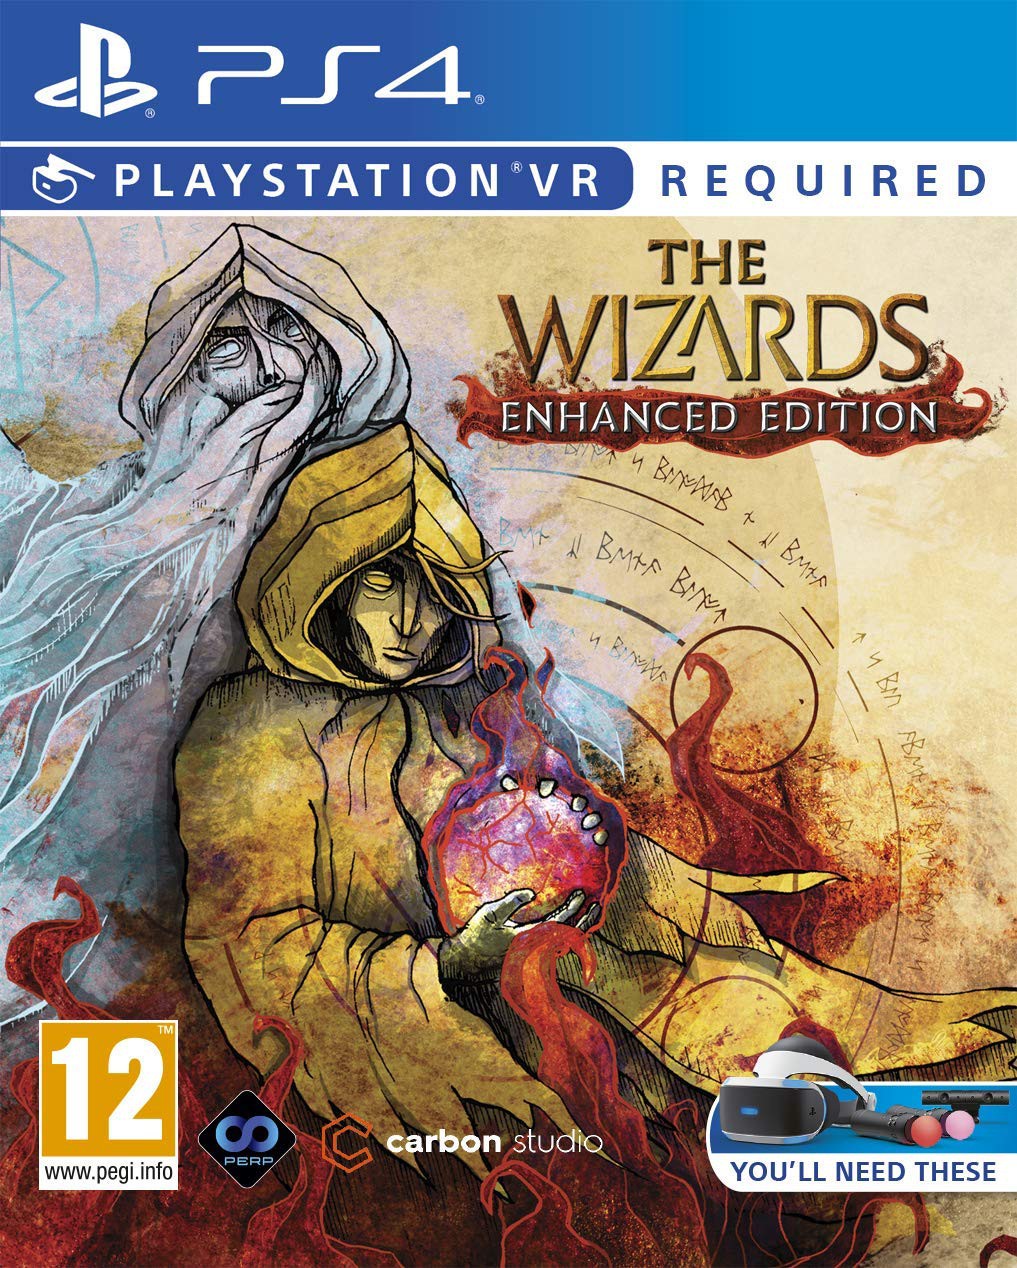 The Wizards - Enhanced Edition VR